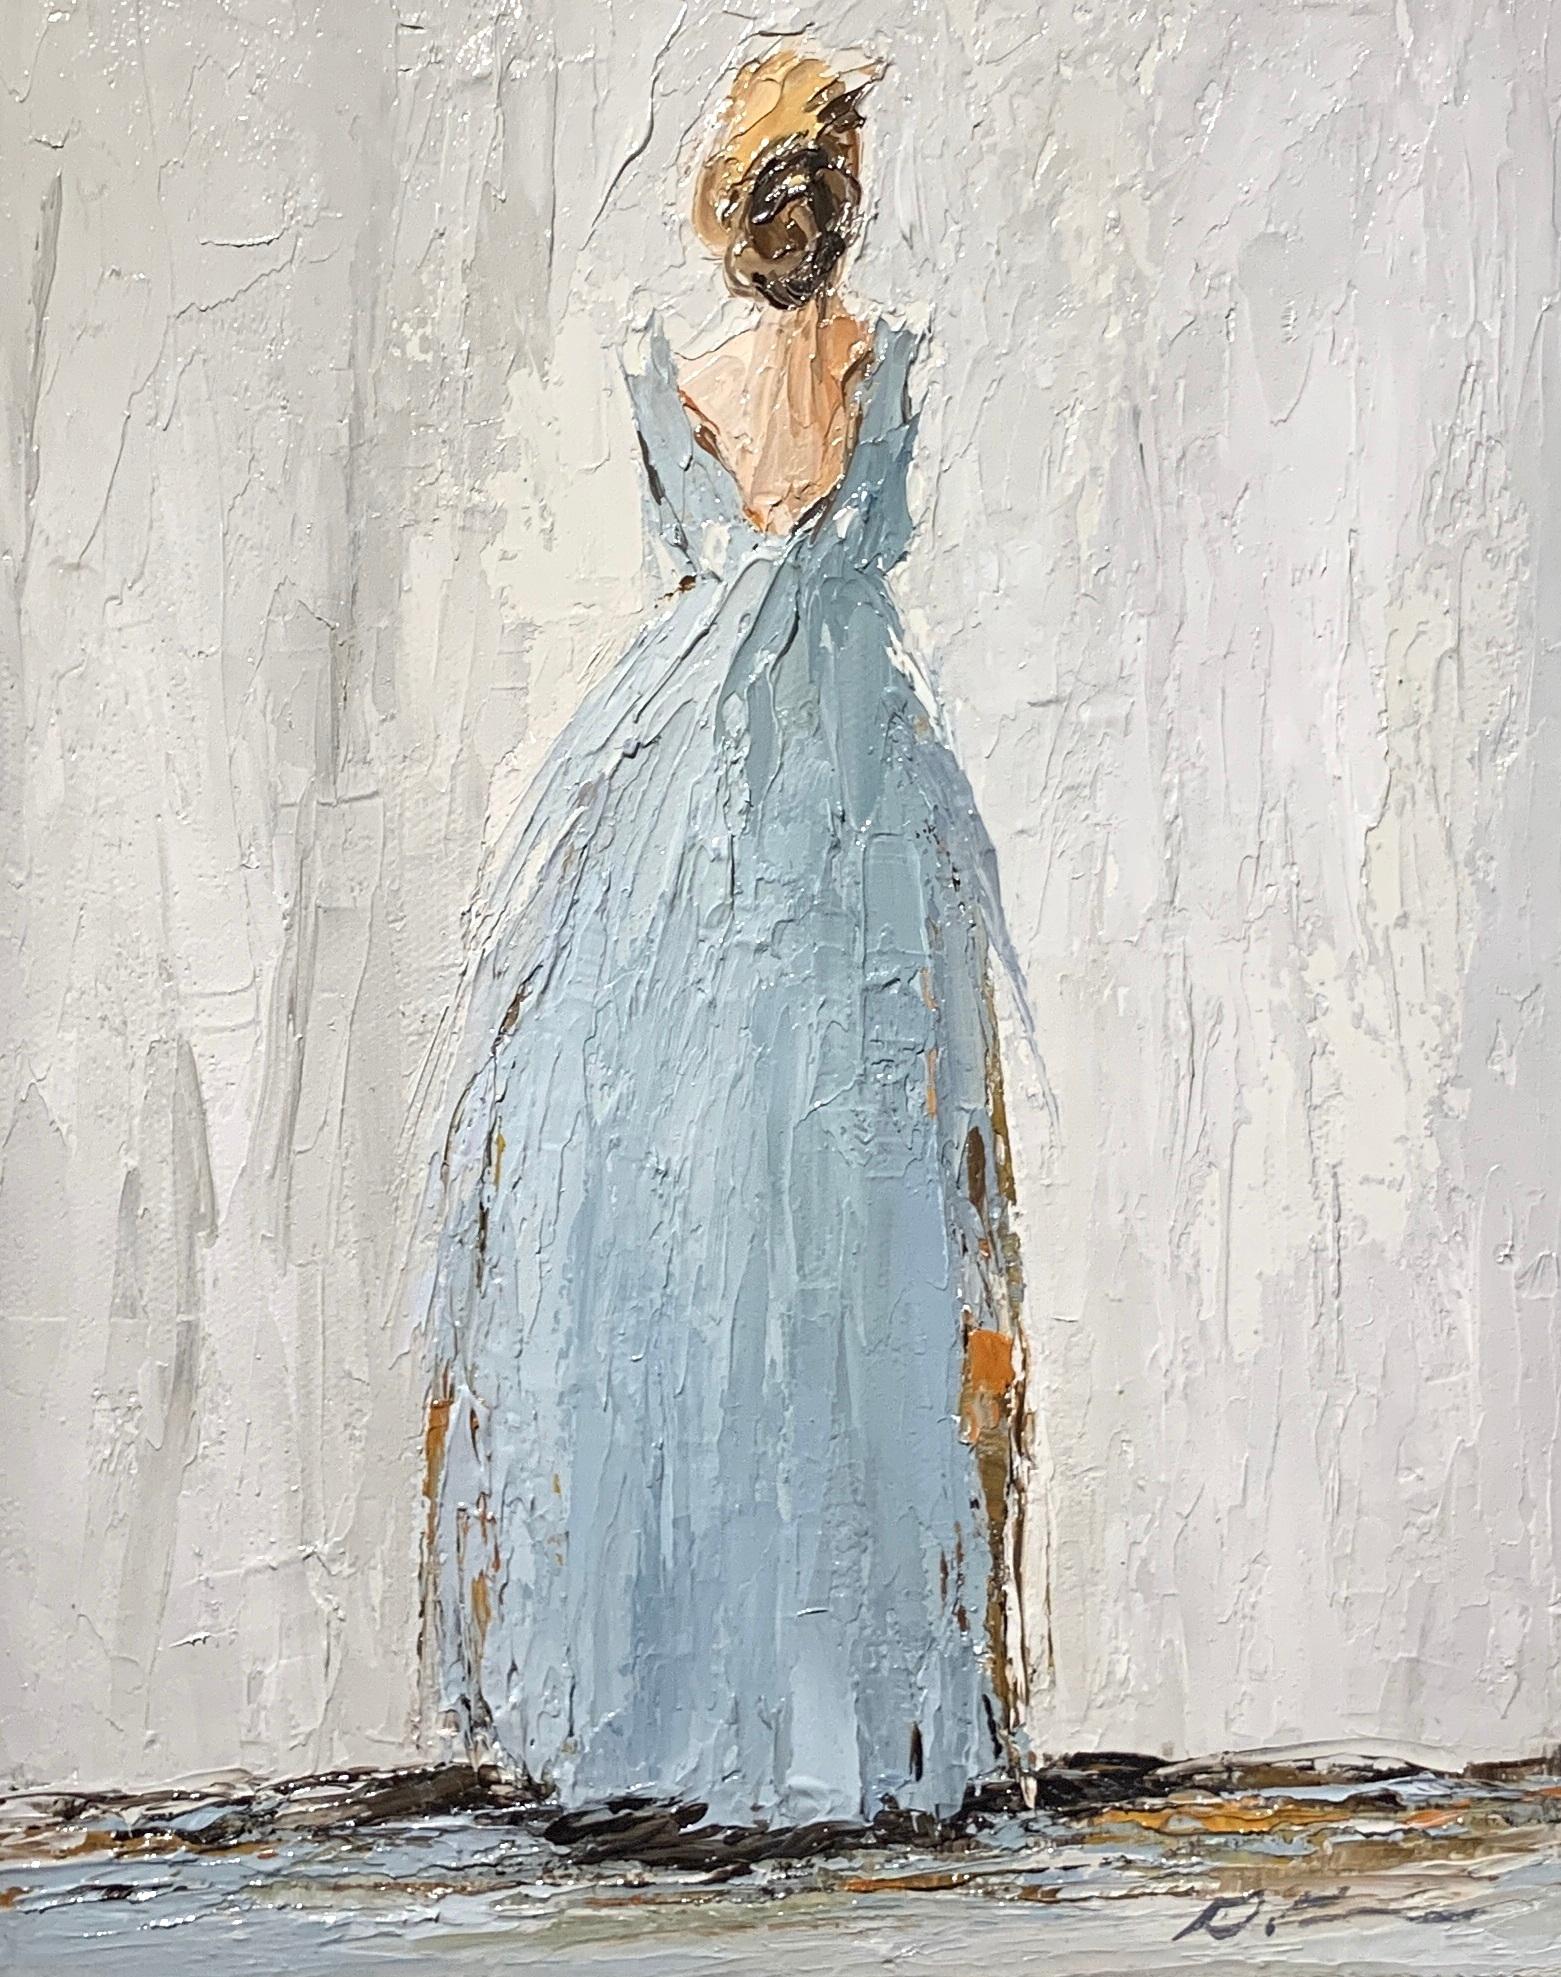 'Elizabeth', is a small vertical framed Impressionist figurative oil on canvas painting created by American artist Geri Eubanks in 2020. Featuring a palette made of blue and golden tonalities, the painting depicts a blond-haired woman represented